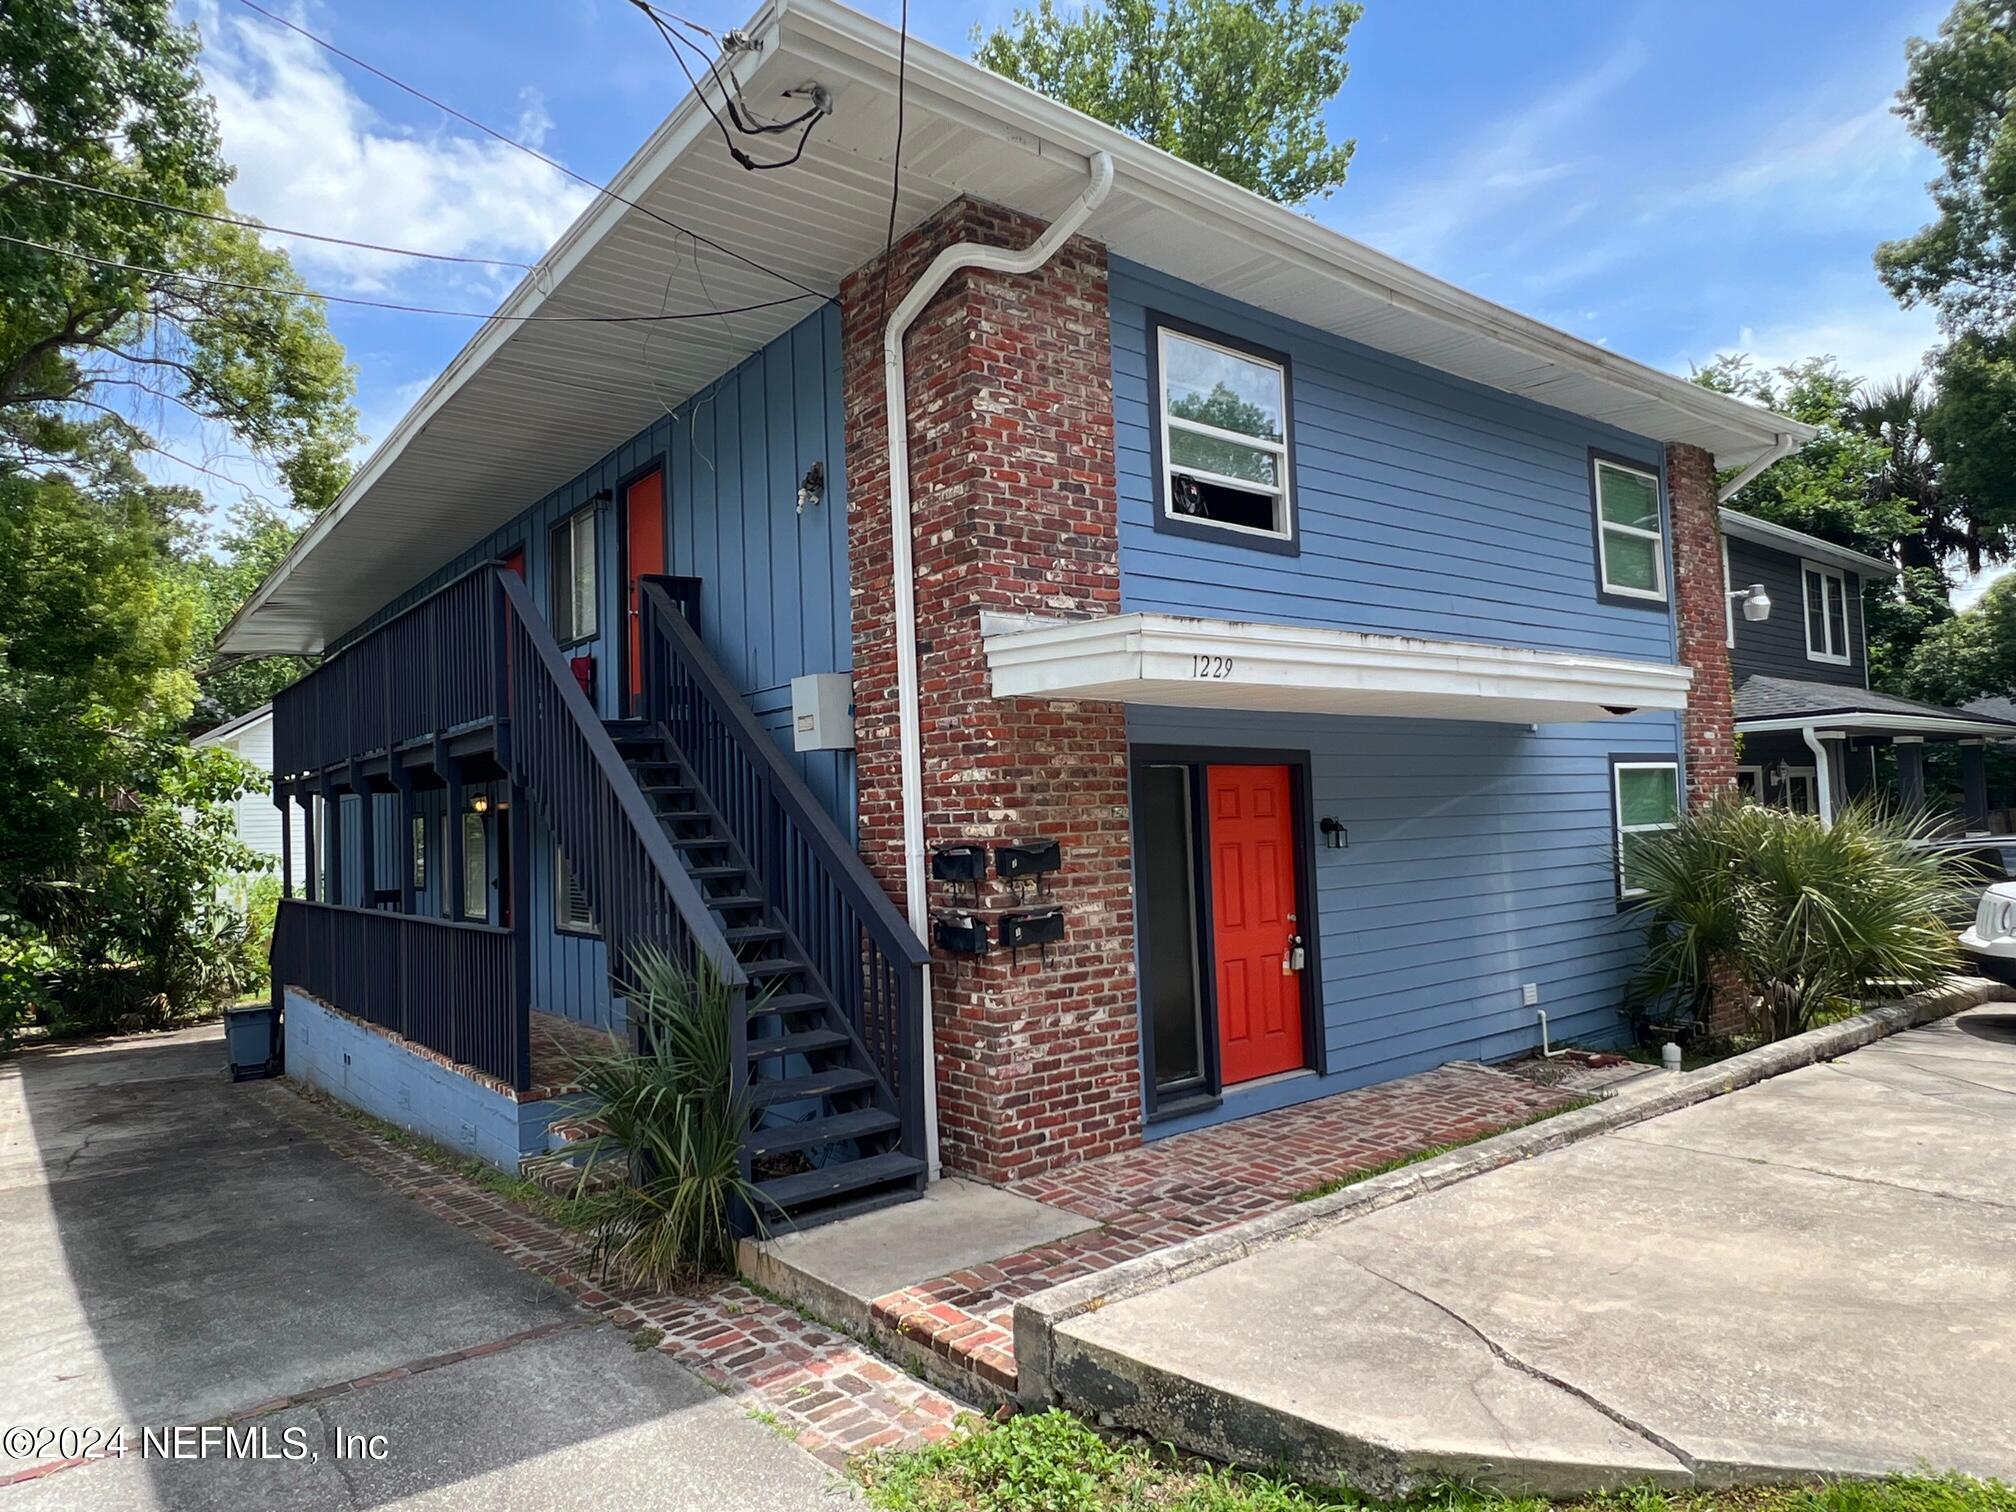 Jacksonville, FL home for sale located at 1229 Willow Branch Avenue Unit 4, Jacksonville, FL 32205